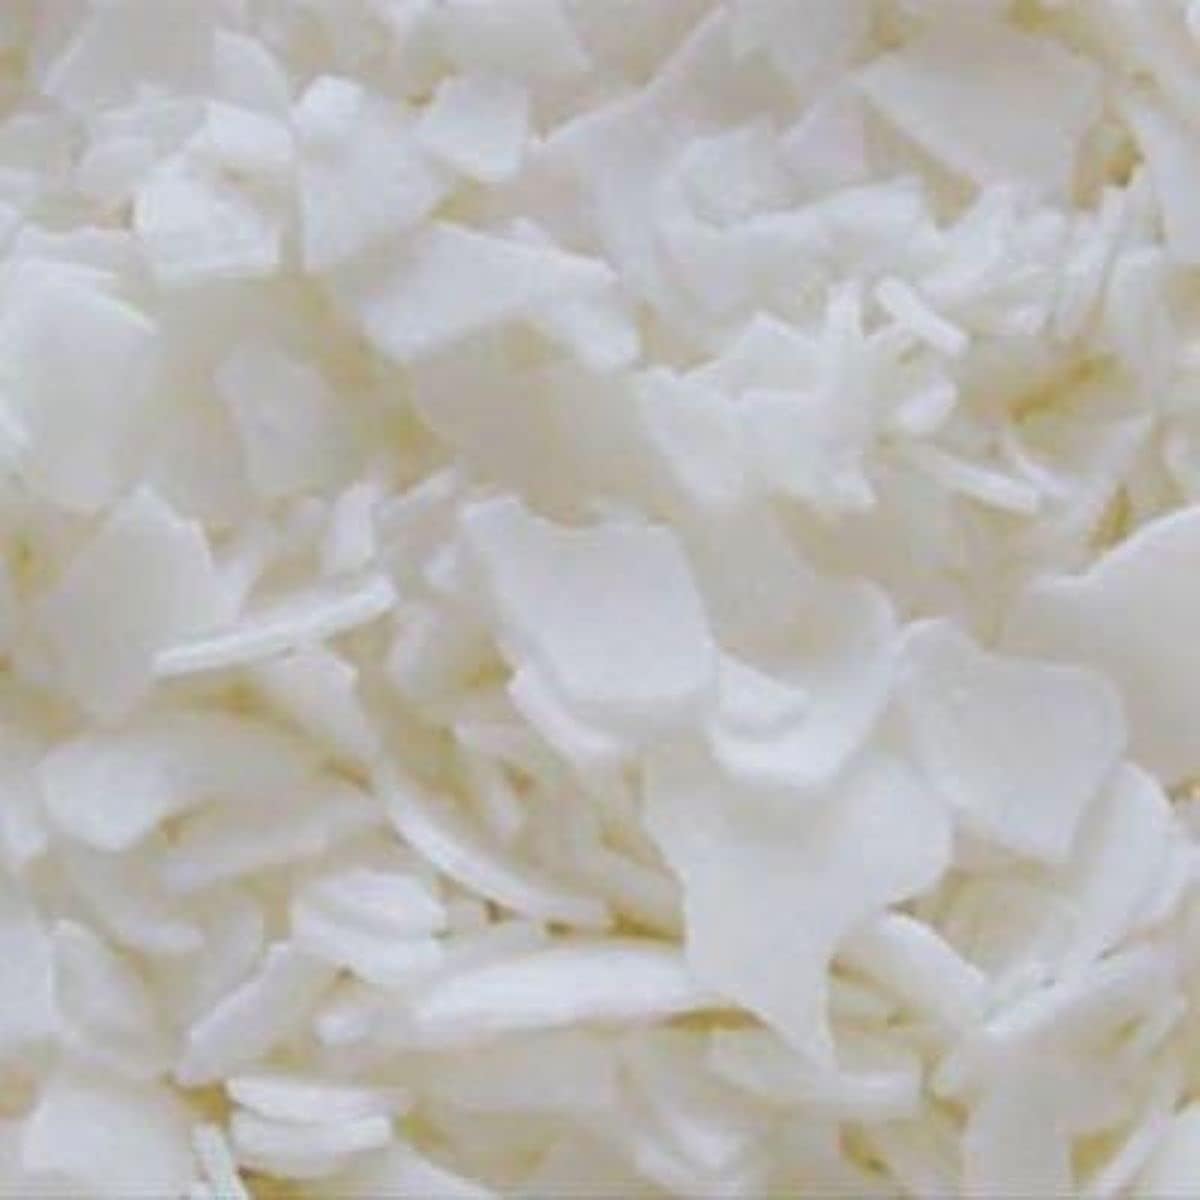 Pure Soy Wax 416 for Candle and Tart Making - 45 LB Case